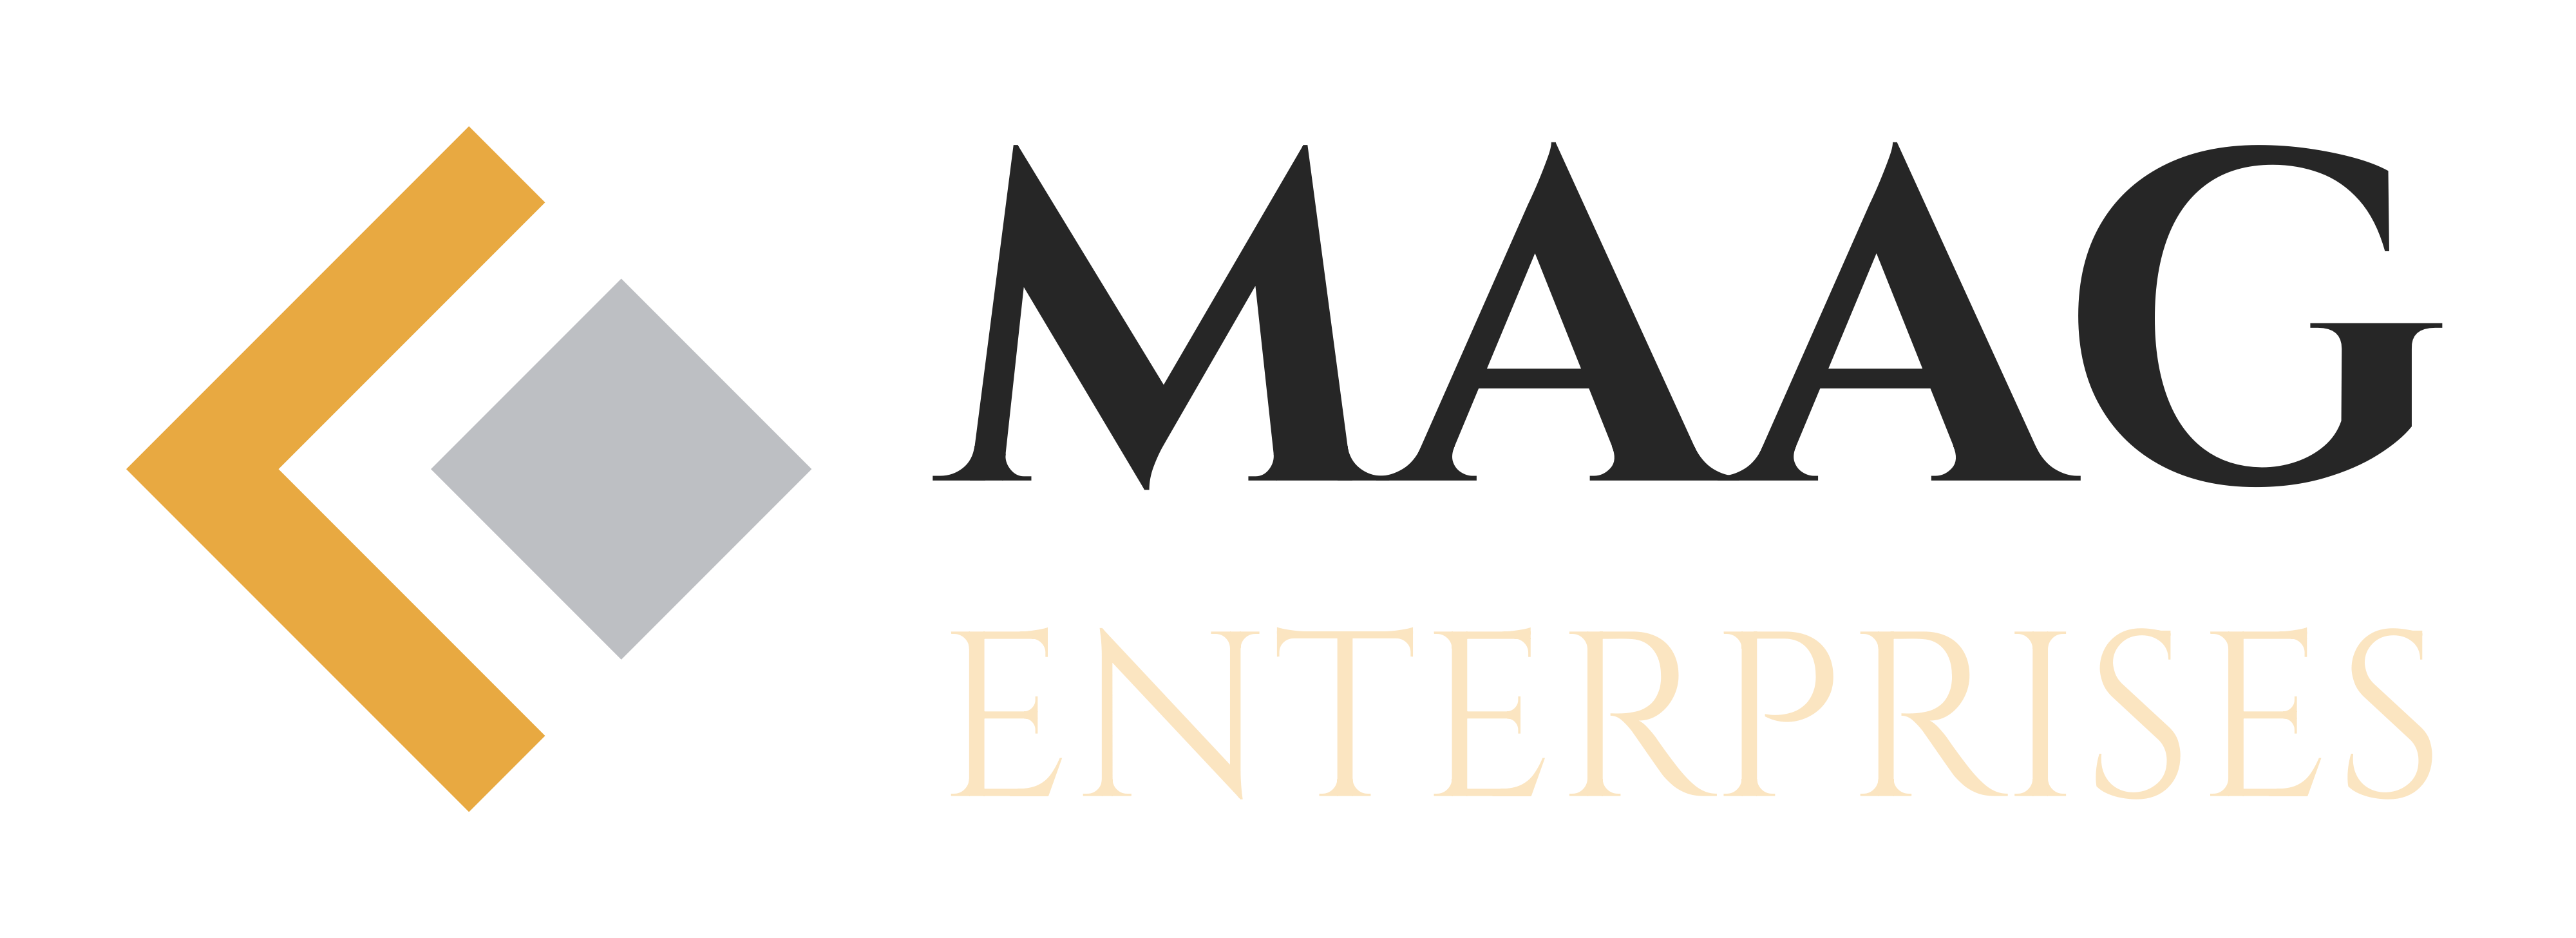 Maag Property Services Logo